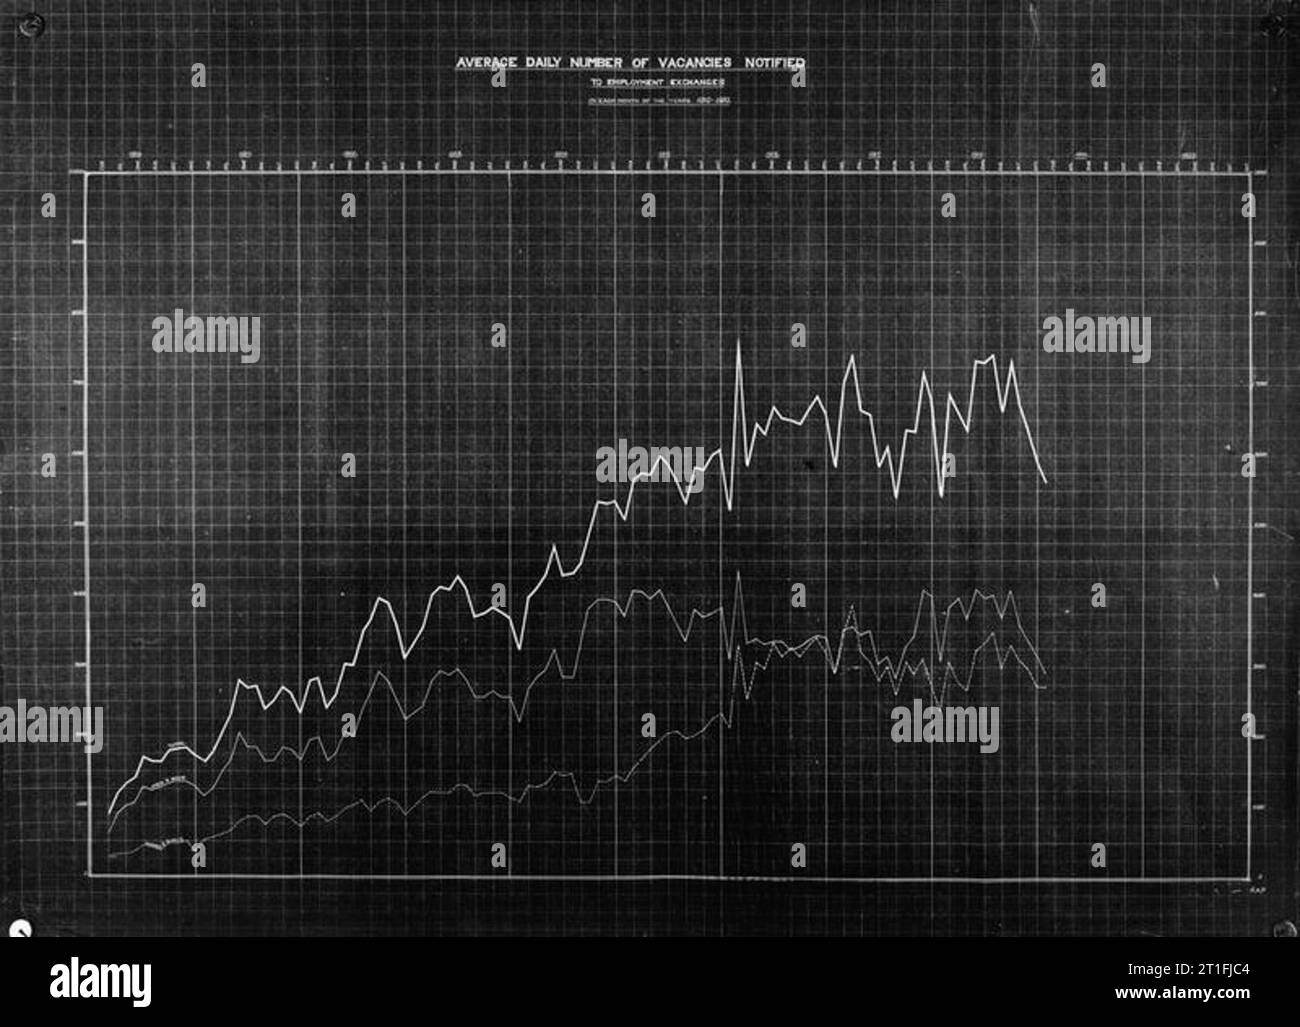 Chart showing placings and vacancies at Employment Exchange 1910-1920. Stock Photo